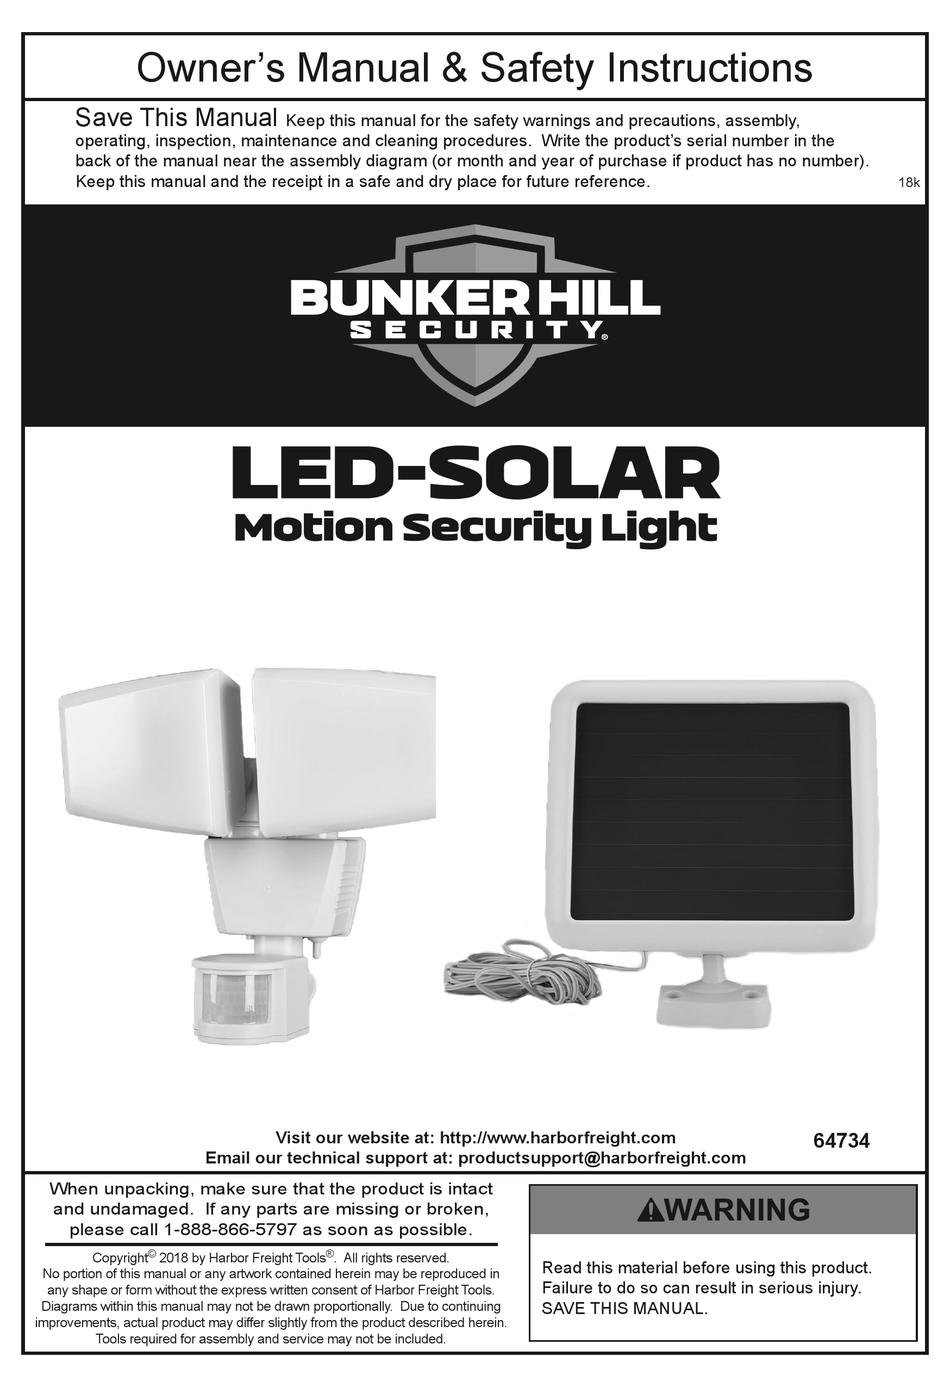 harbor freight bunker hill security dvr ip